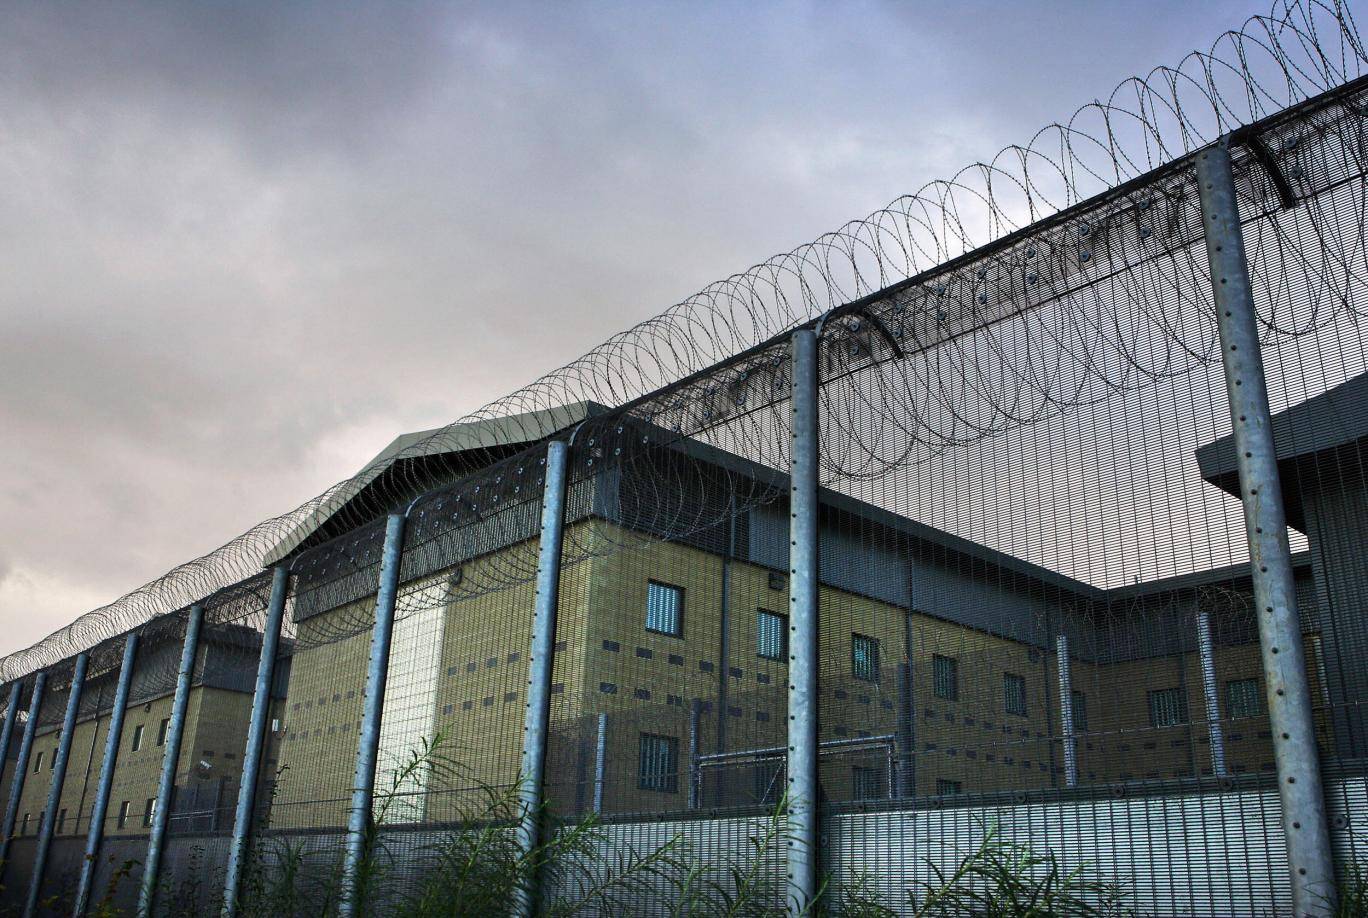 Incidents of control and restraint against detainees in Brook House removal centre occurred 334 times last year, compared with 161 the previous year and 128 in 2015, according to an inspection report by the Independent Monitoring Board